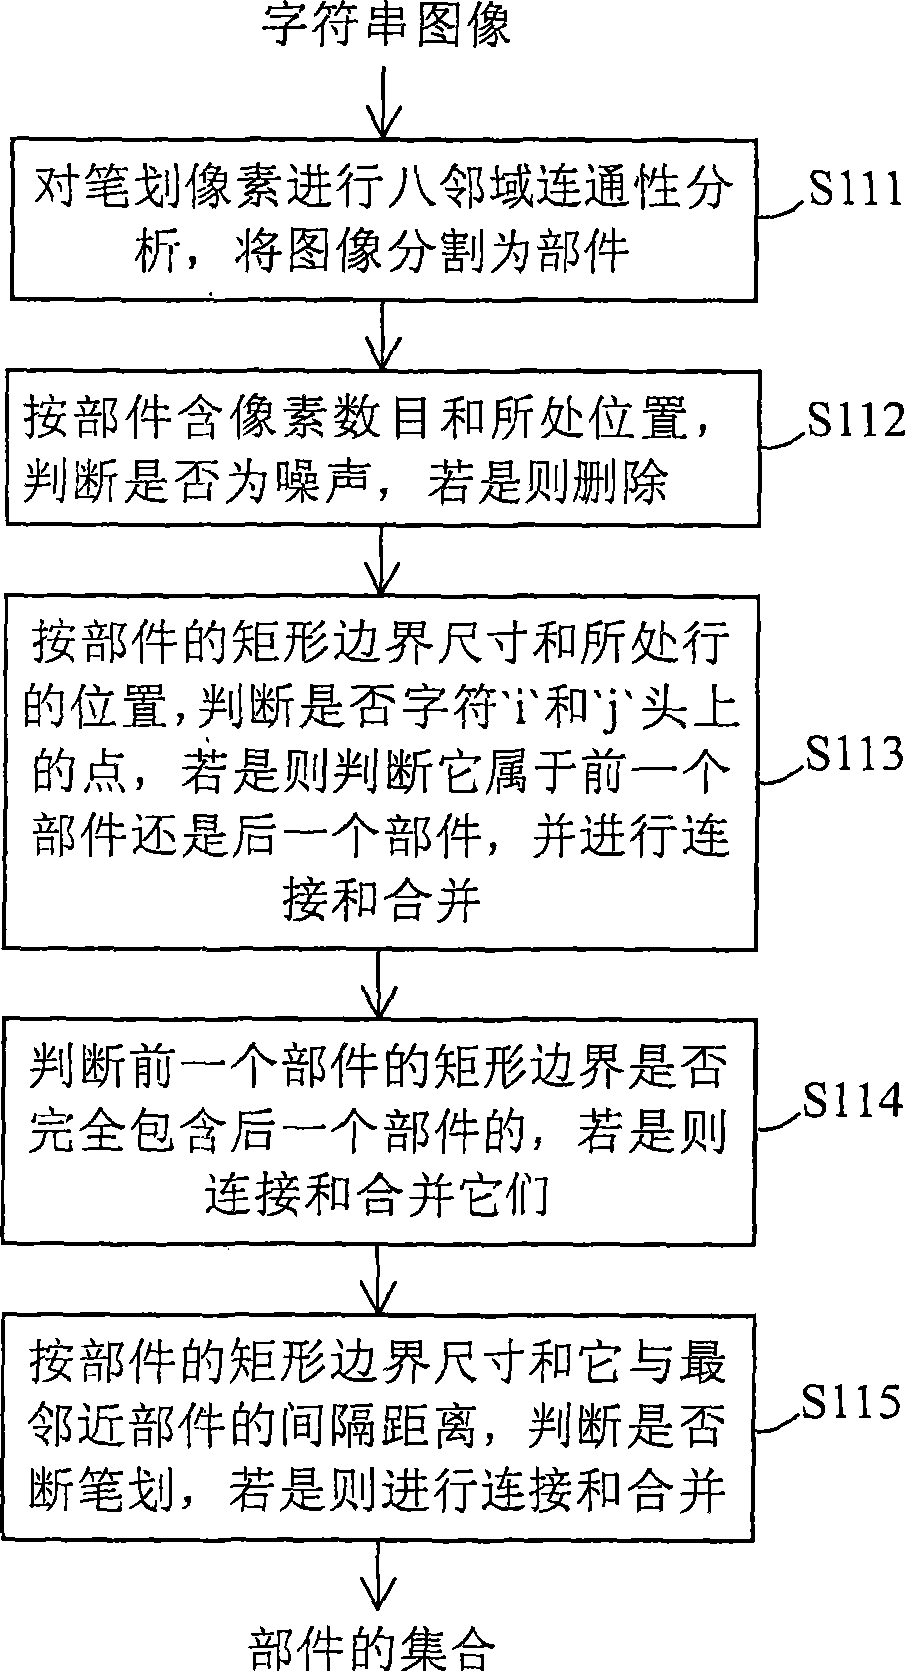 Character information identification device and method